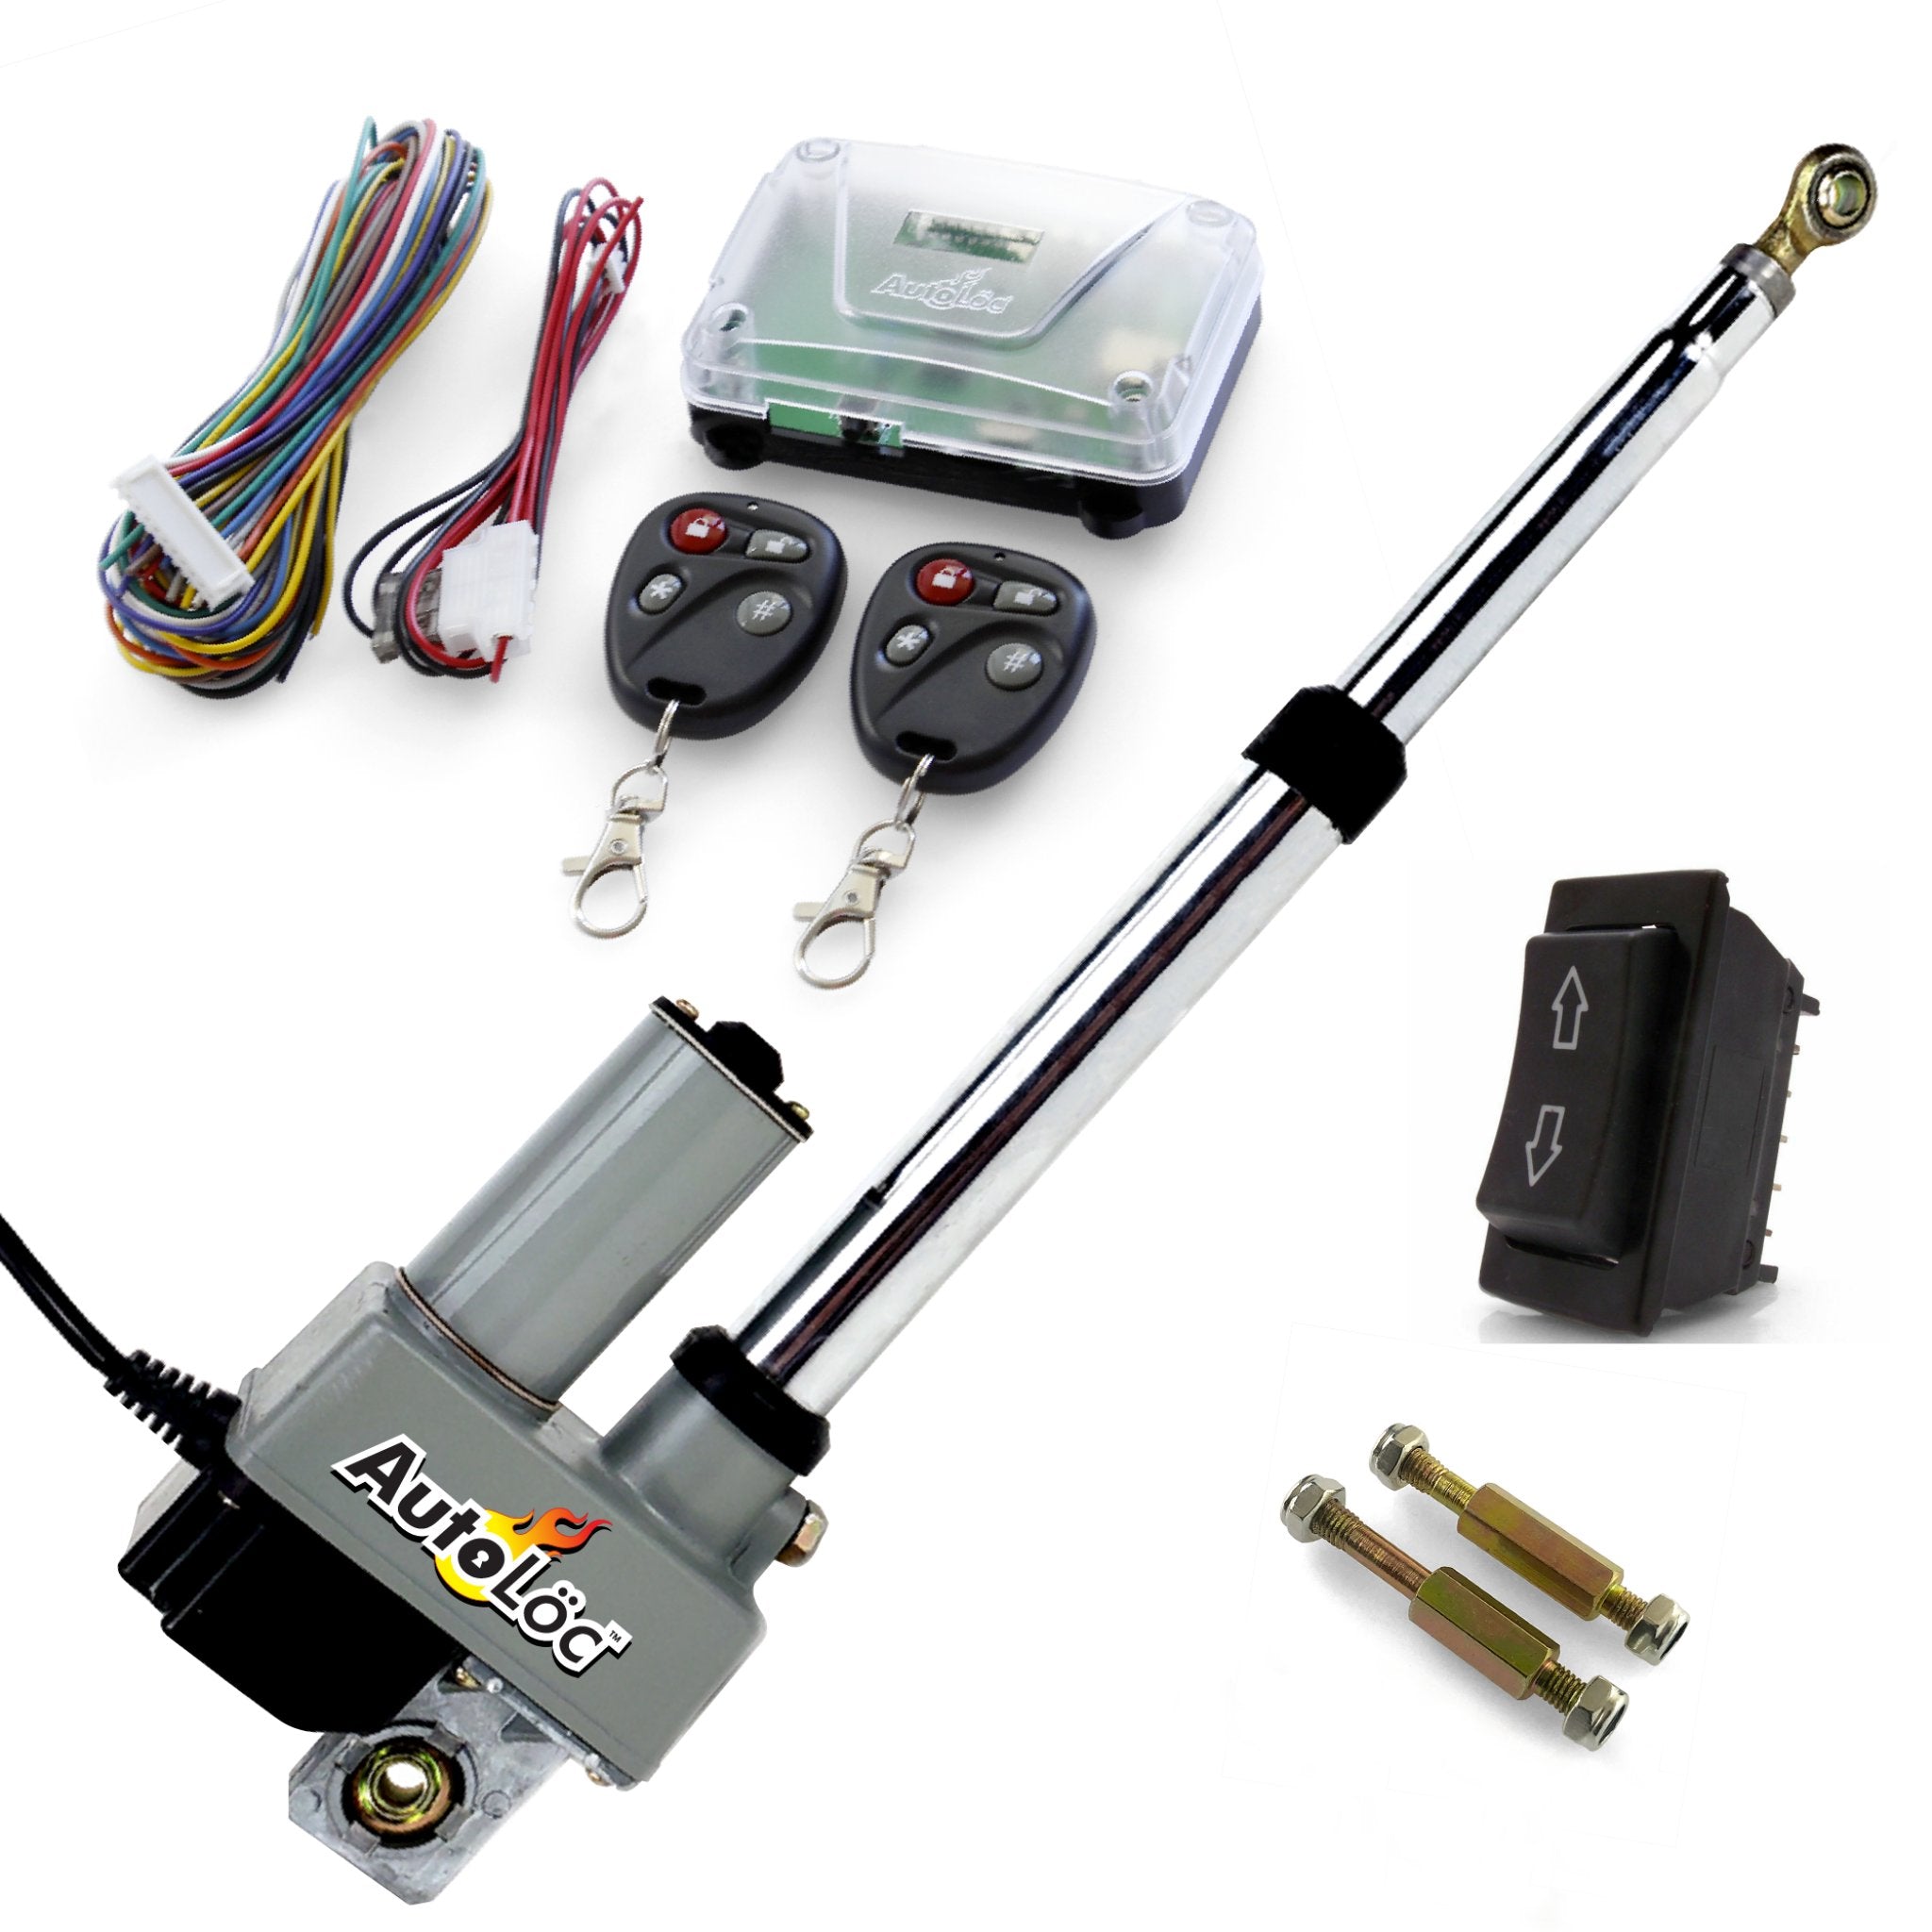 Remote Control Power Tonneau Cover Kit w/ 12V Linear Actuator Motor & Switch